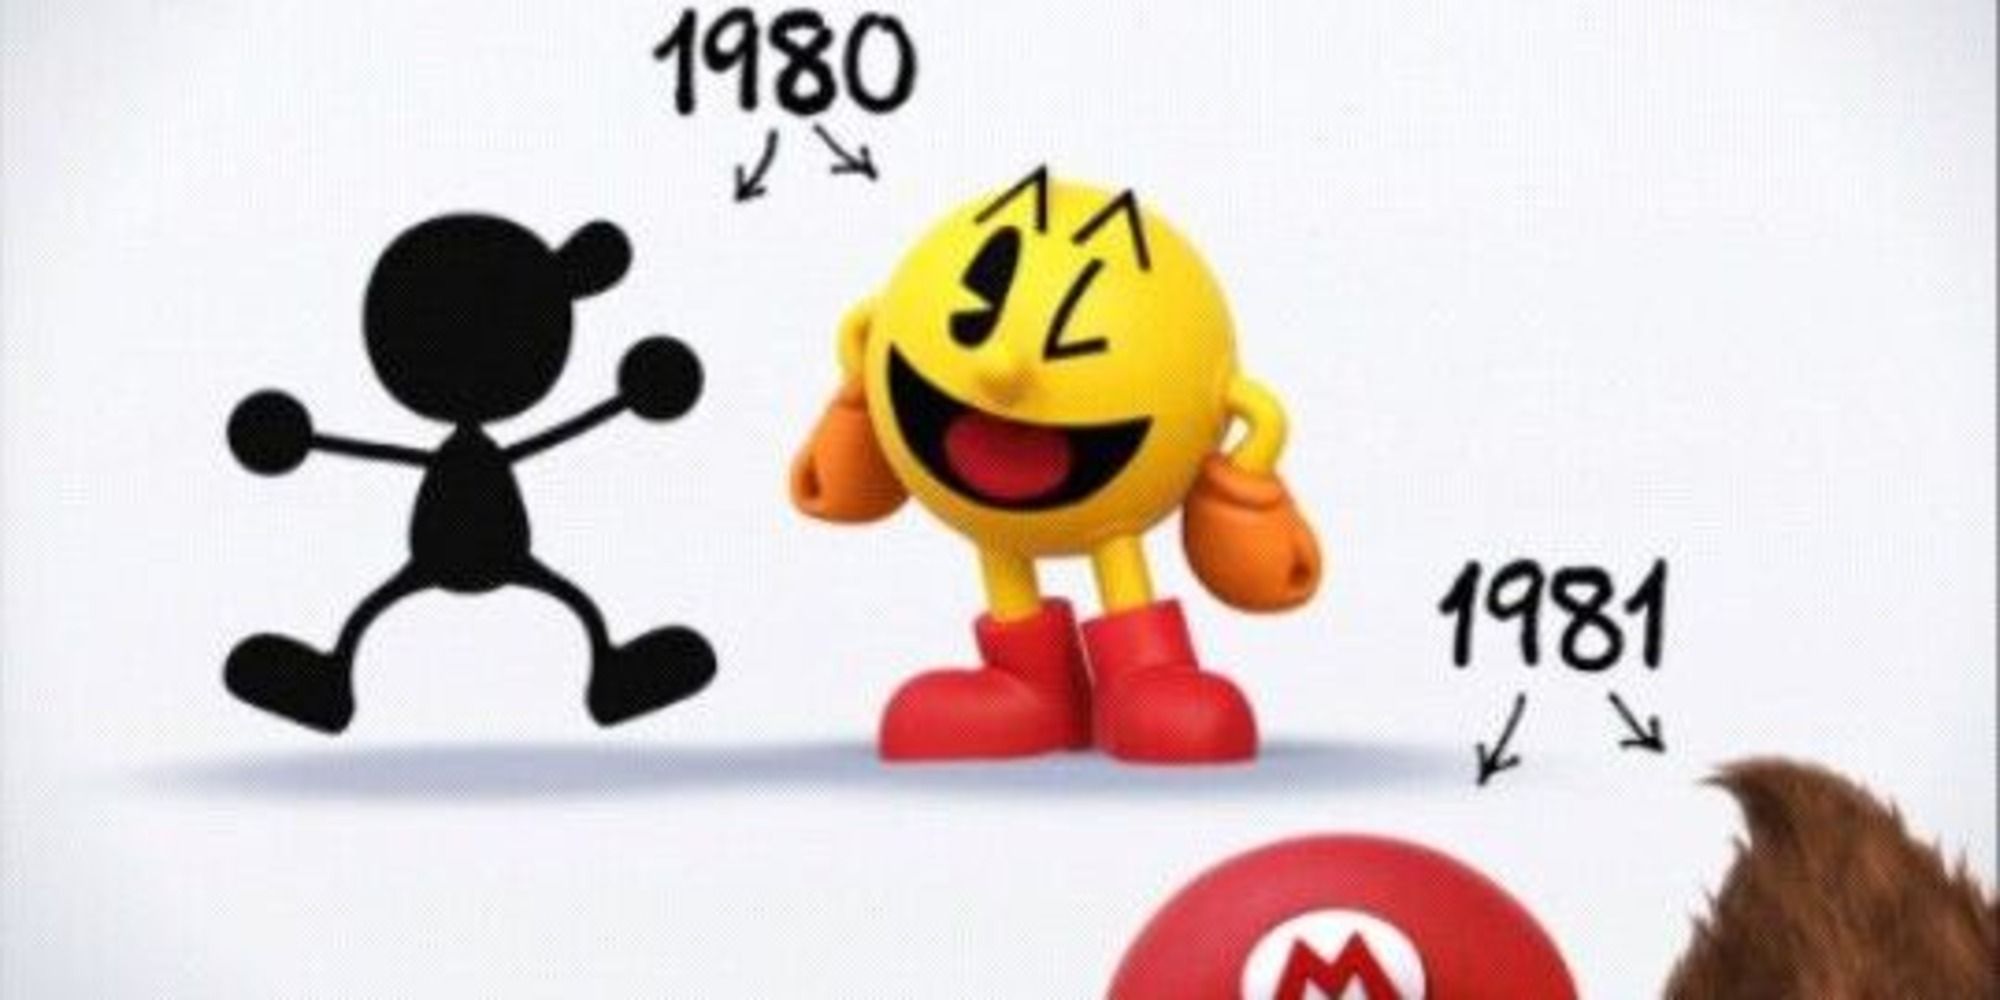 The end of Pac-Man's reveal trailer in Smash 4, showing the year of his debut along with Mr. Game & Watch, Mario, and Donkey Kong.